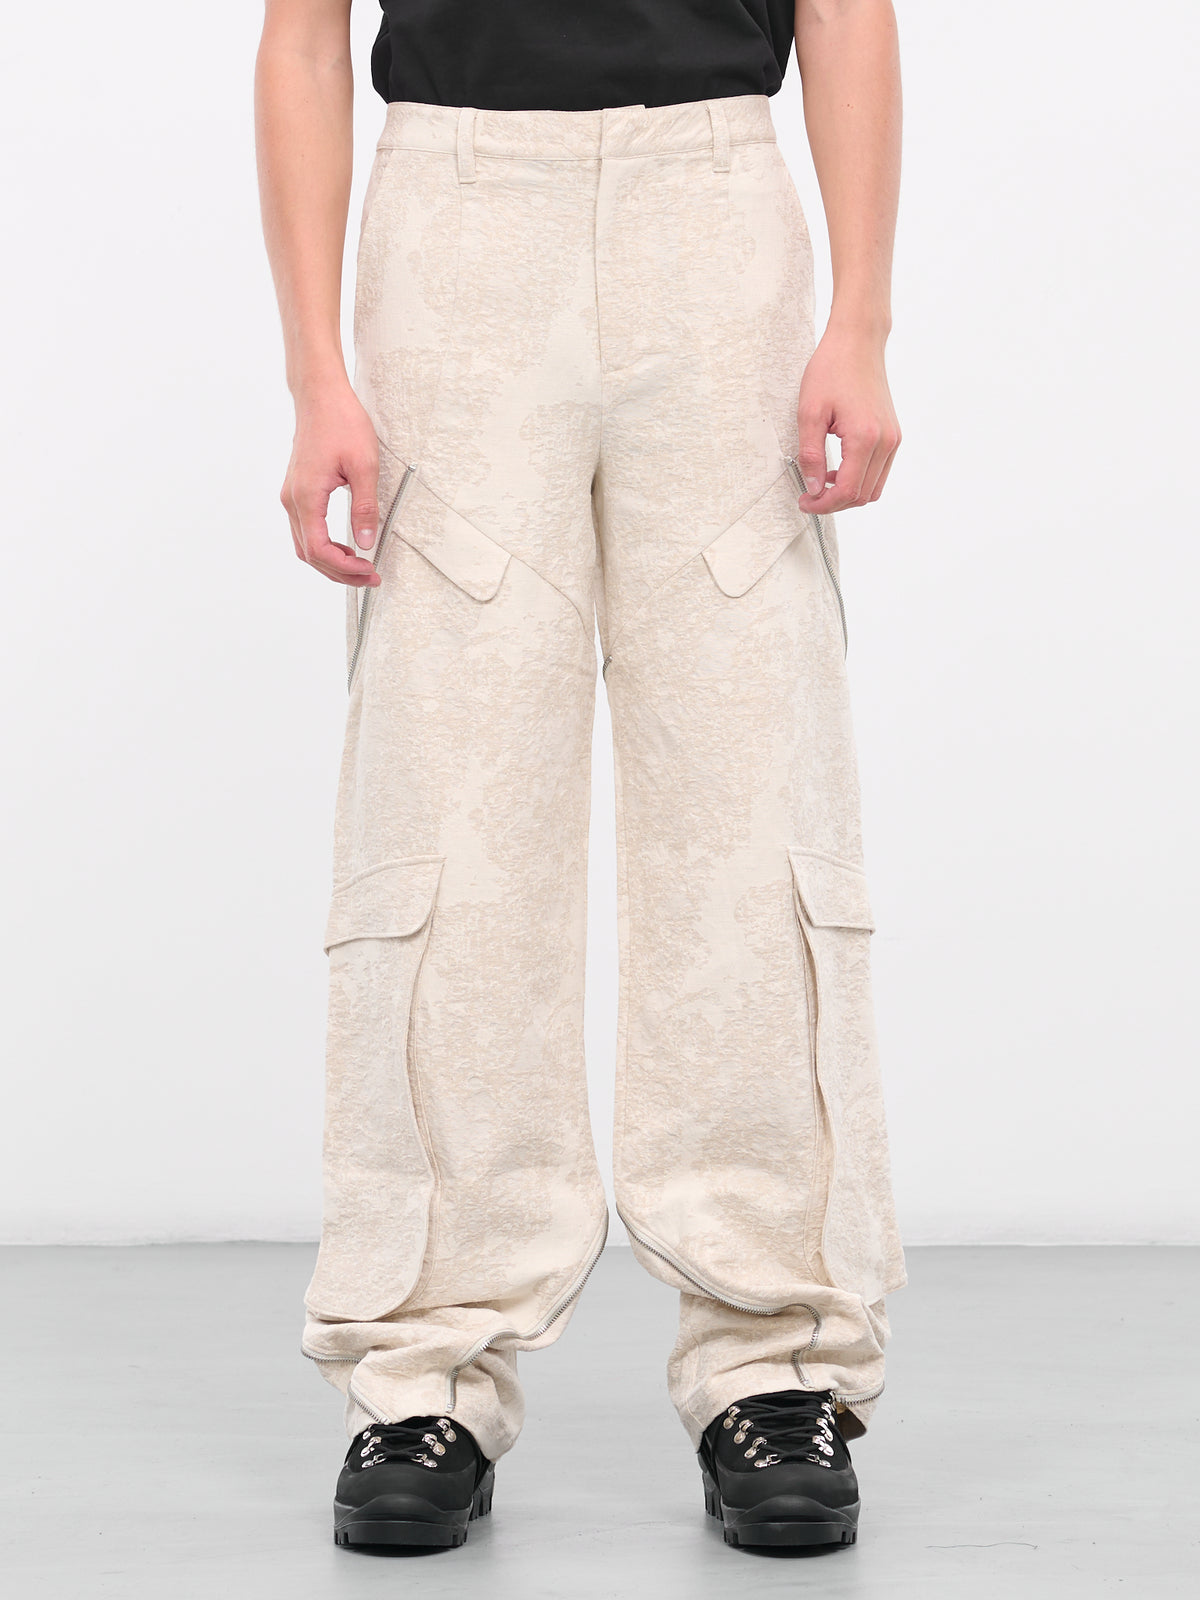 Punctured Cargo Pants (10-121-ST18-STONE)